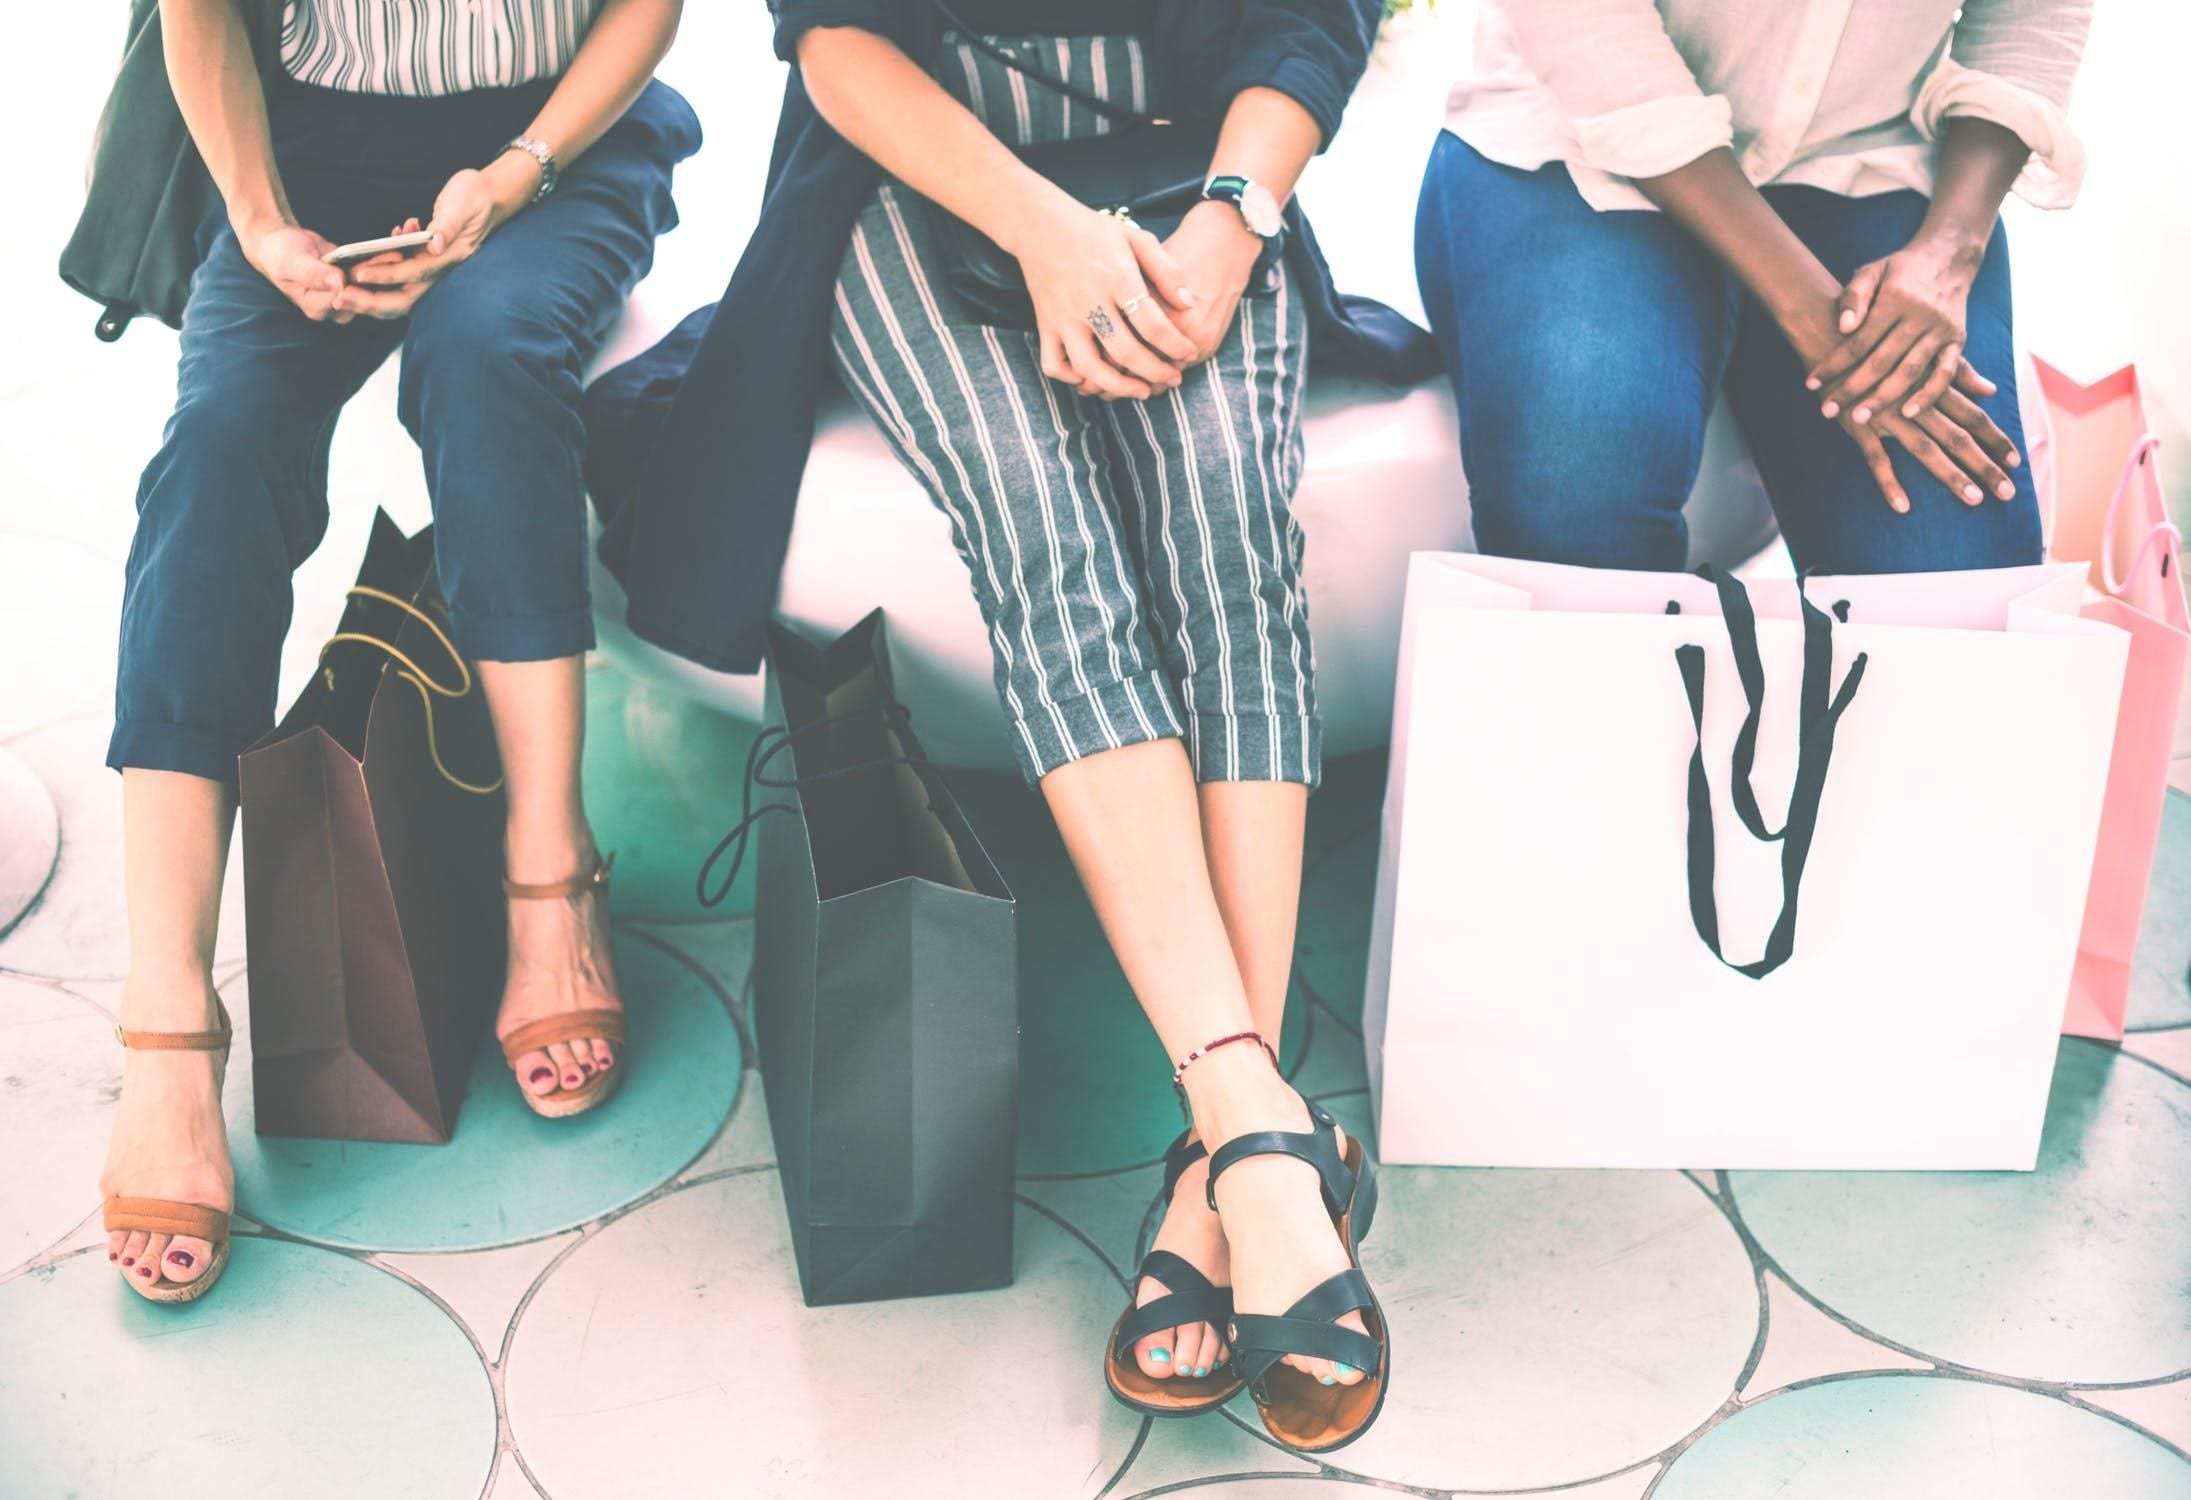 understanding the customer journey is essential, finding ways to make it better is the one way to launch your ecommerce brand to success and ensure you stay there for years to come.